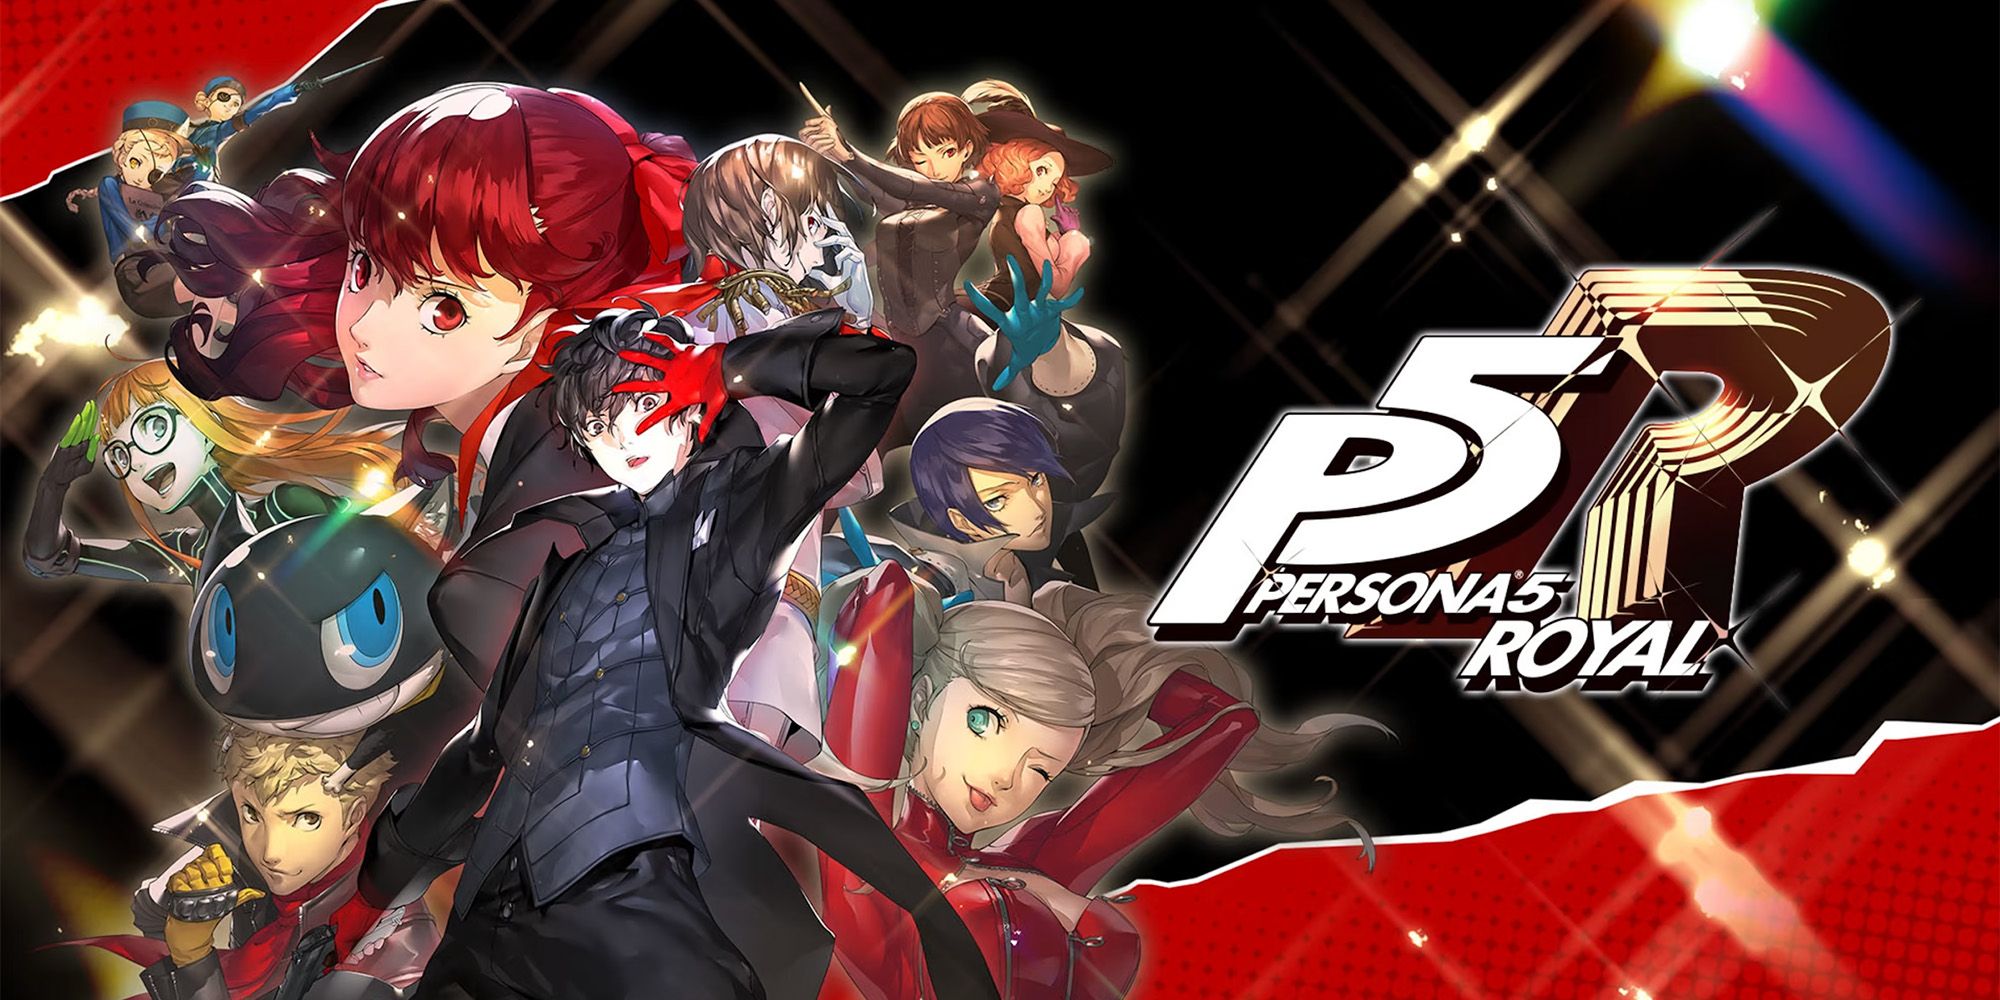 Joker, Morgana, Ann, And The Rest Of The Main Cast of Persona 5 Royal Posing